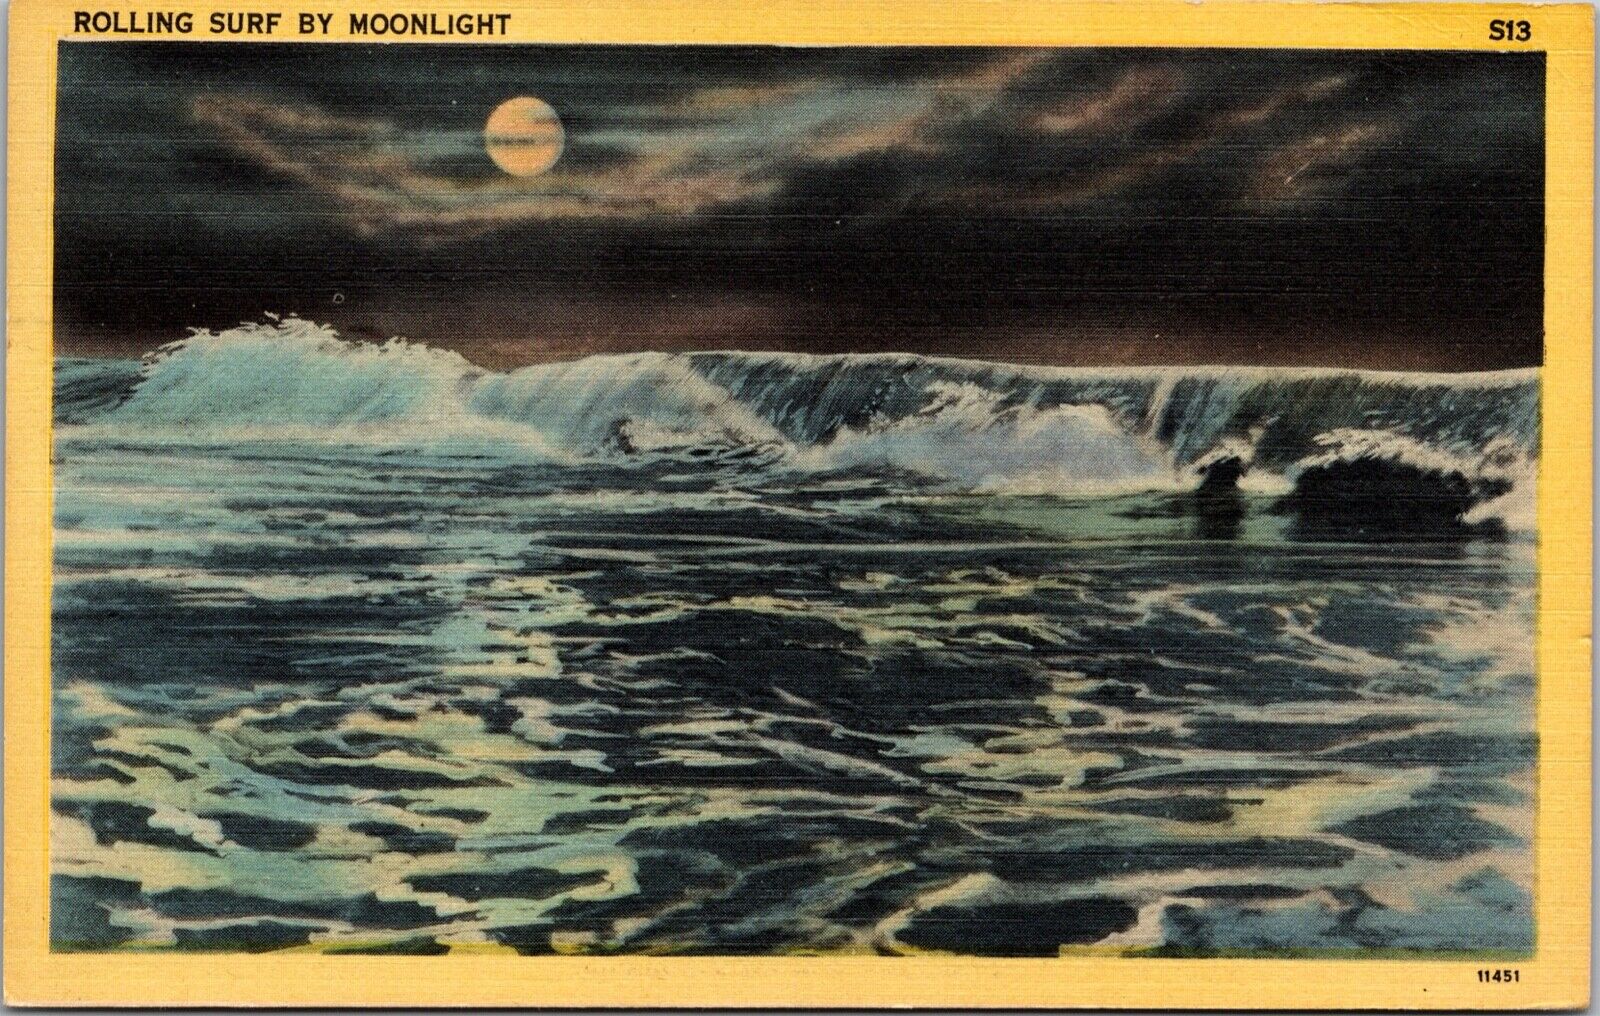 1941 Rolling Surf By Moonlight, Greetings from North East PA Vintage Postcard